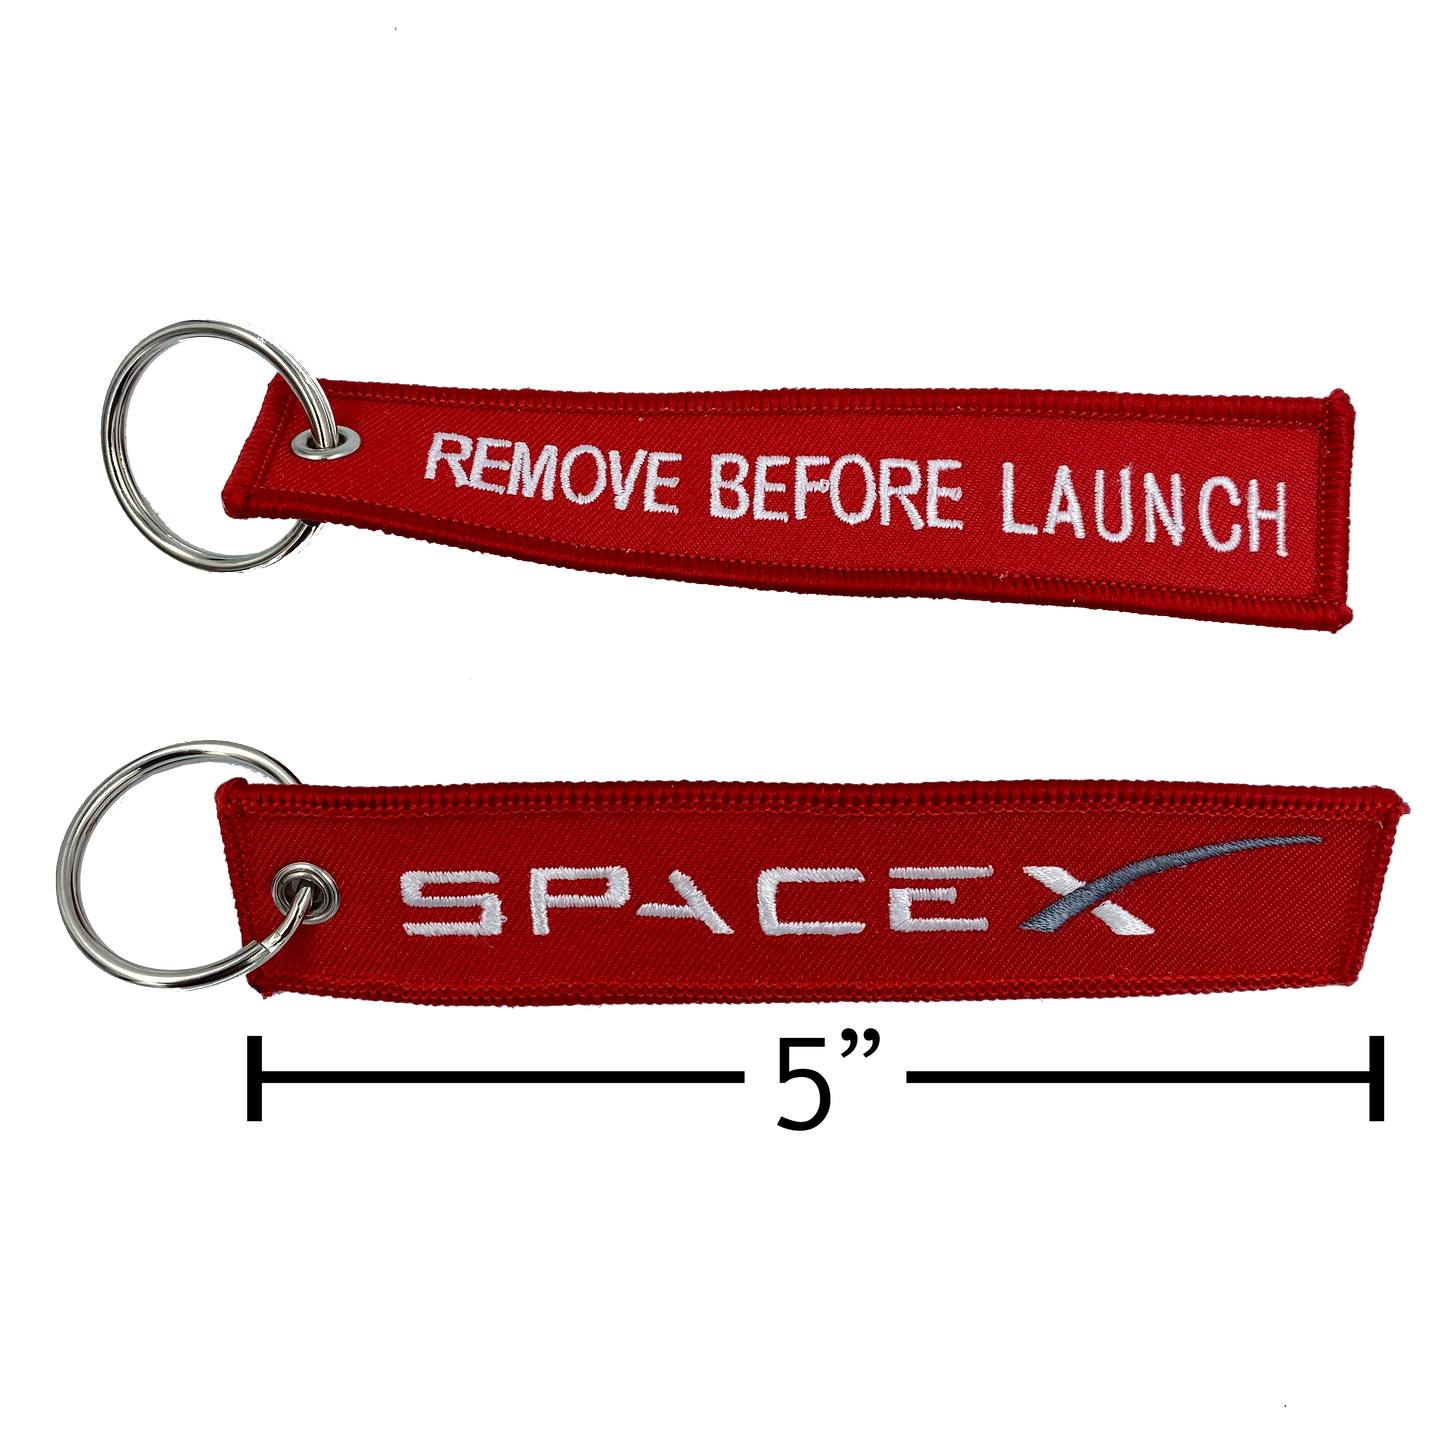 II-019 Space X REMOVE BEFORE LAUNCH Keychain or Luggage Tag or zipper pull SpaceX